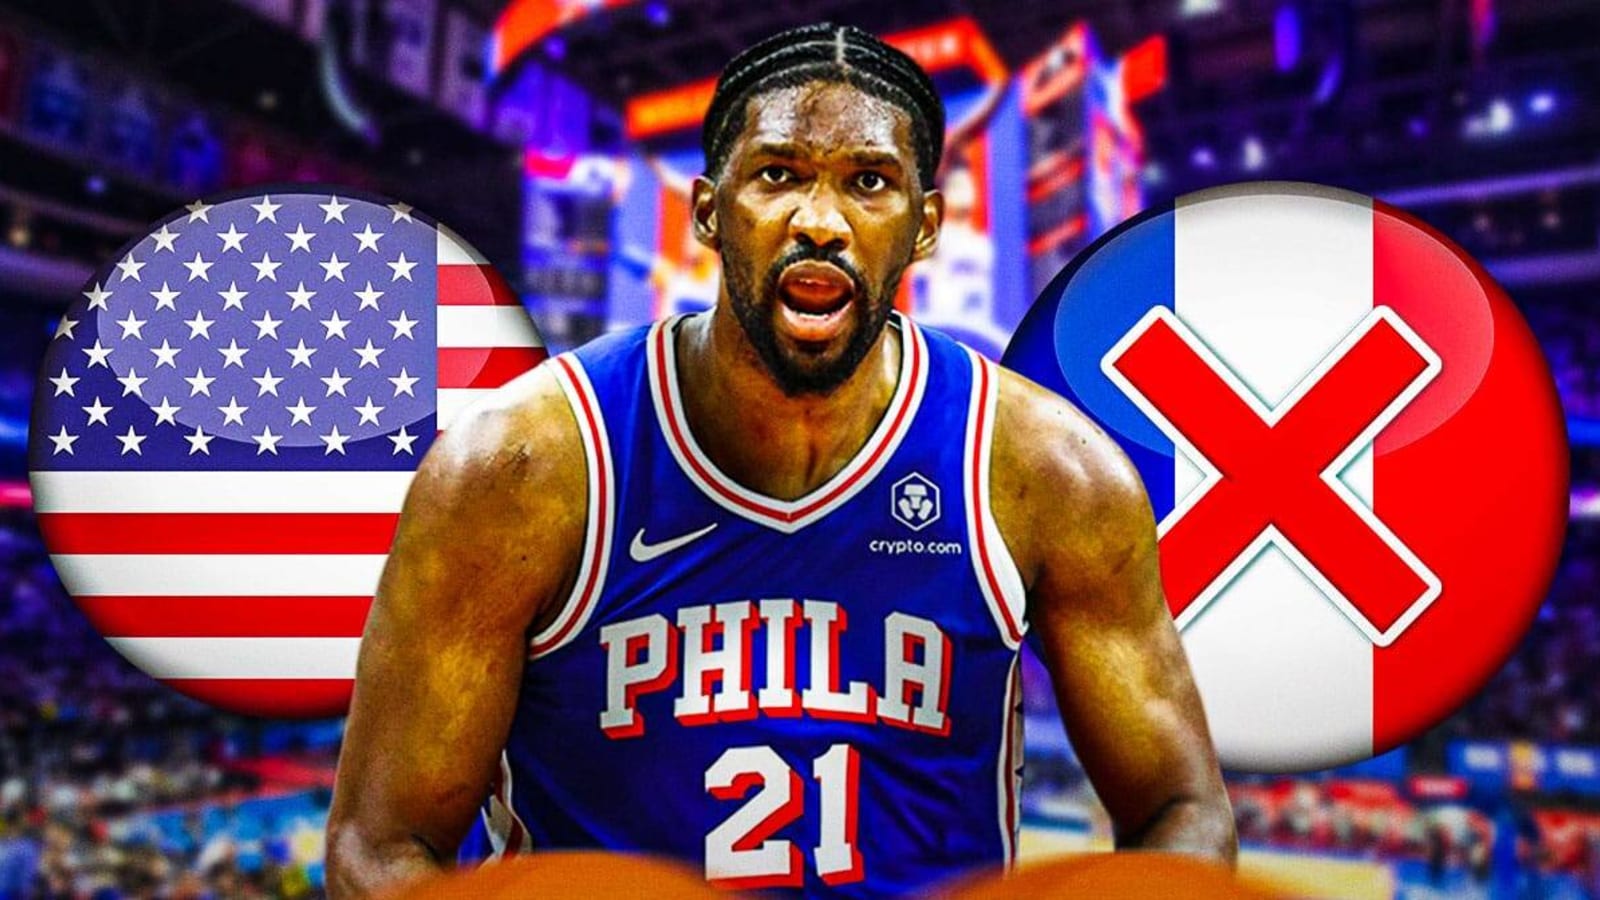 76ers’ Joel Embiid’s 2021 Olympic promise to France leaks after Team USA selection